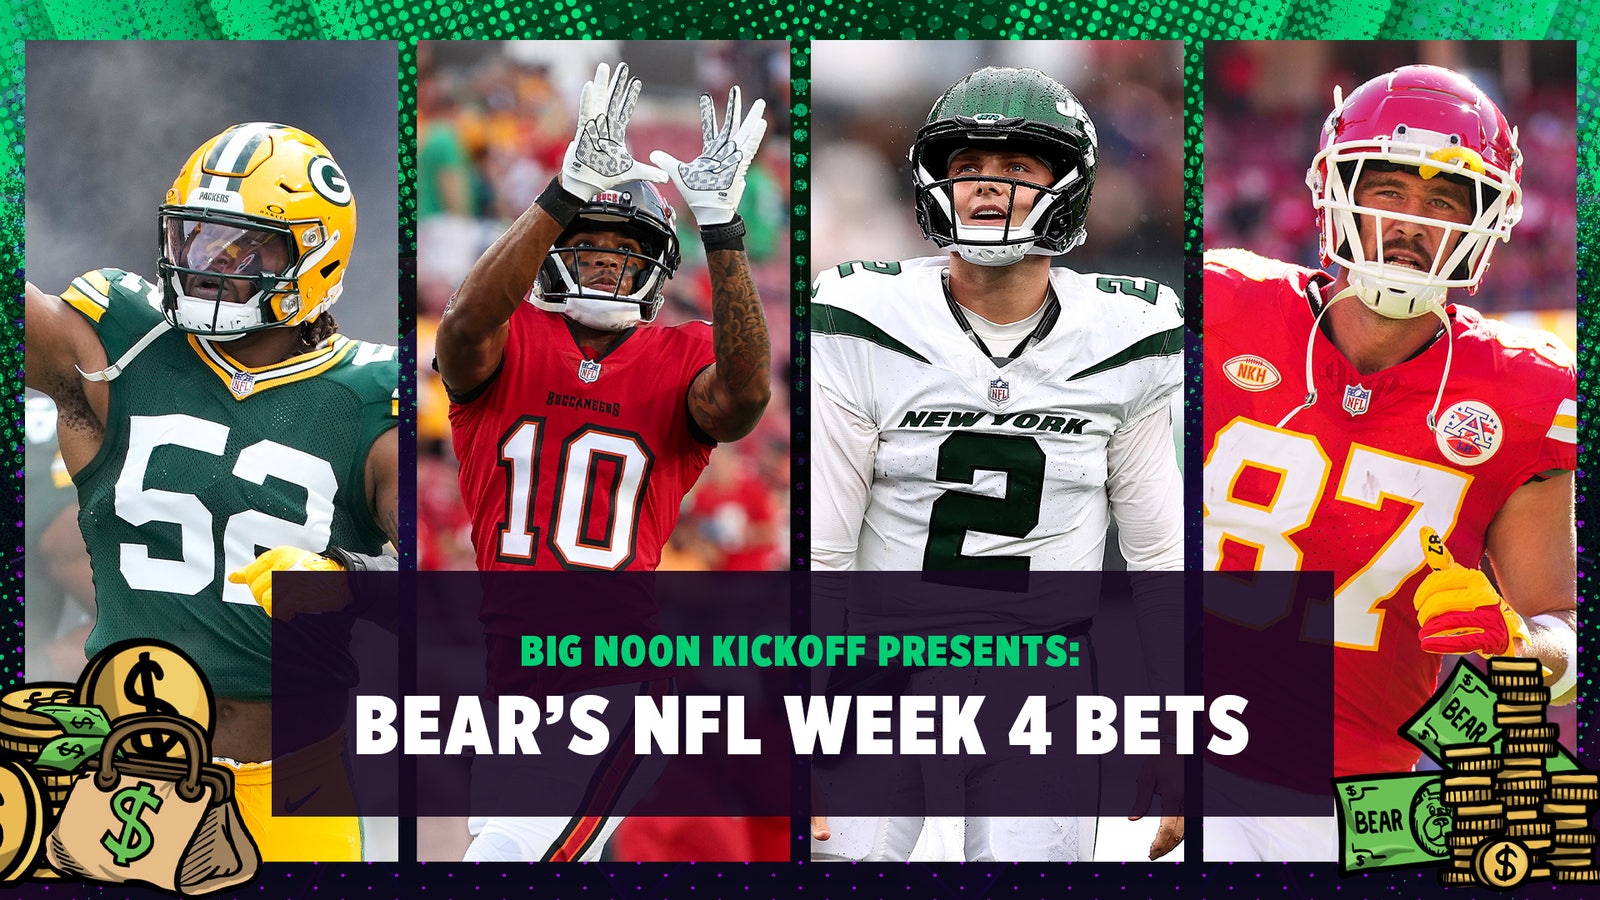 Saints vs. Buccaneers, Jets vs. Chiefs stand out as best bets of NFL Week 4